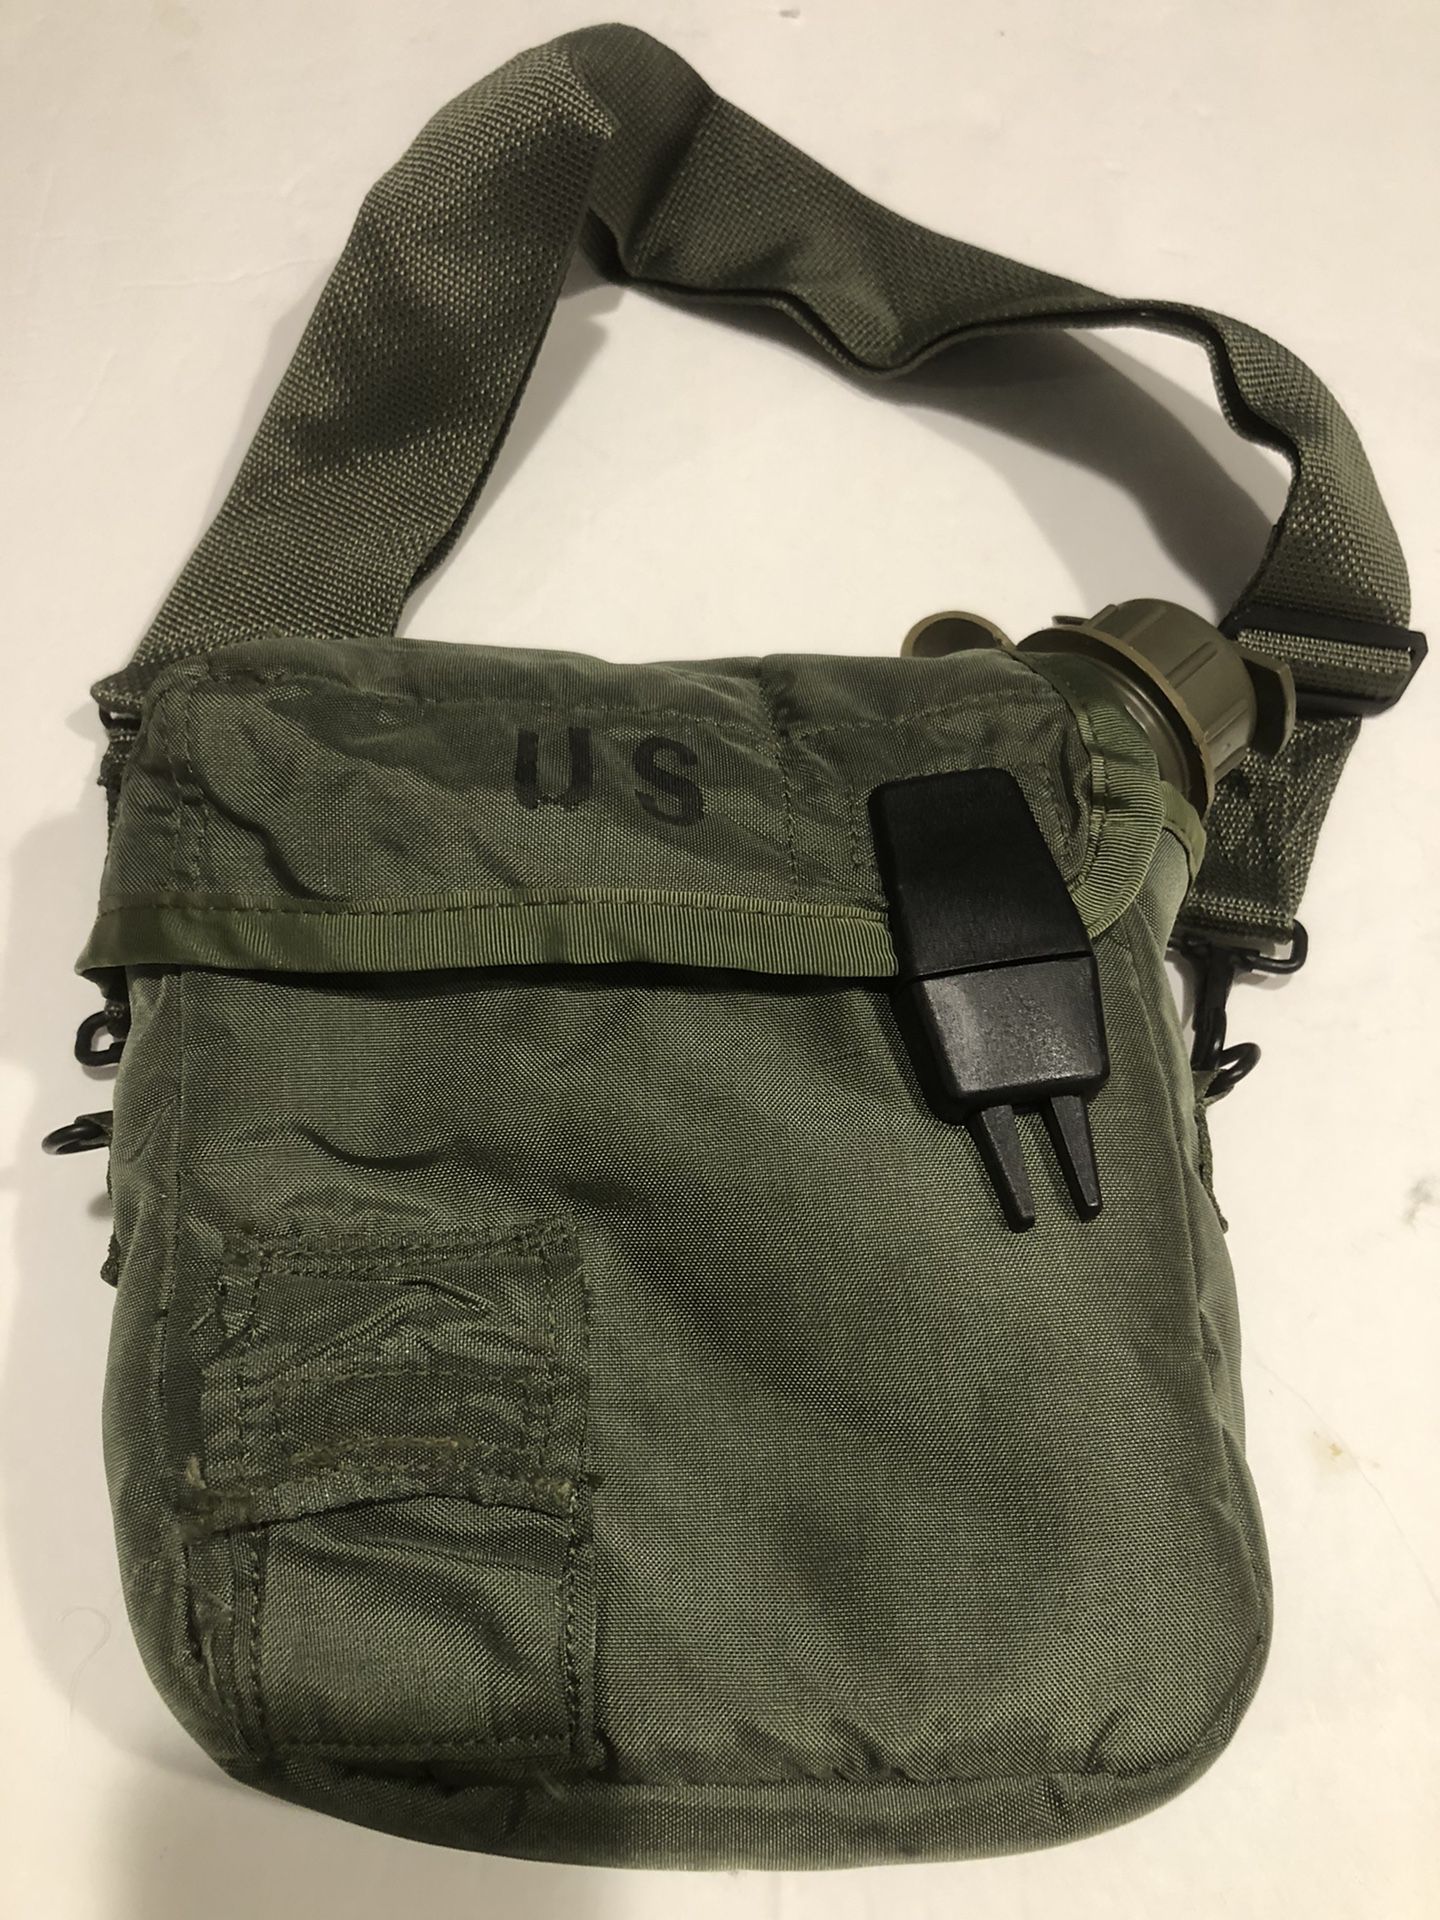 Military 2 Qt collapsible water canteen